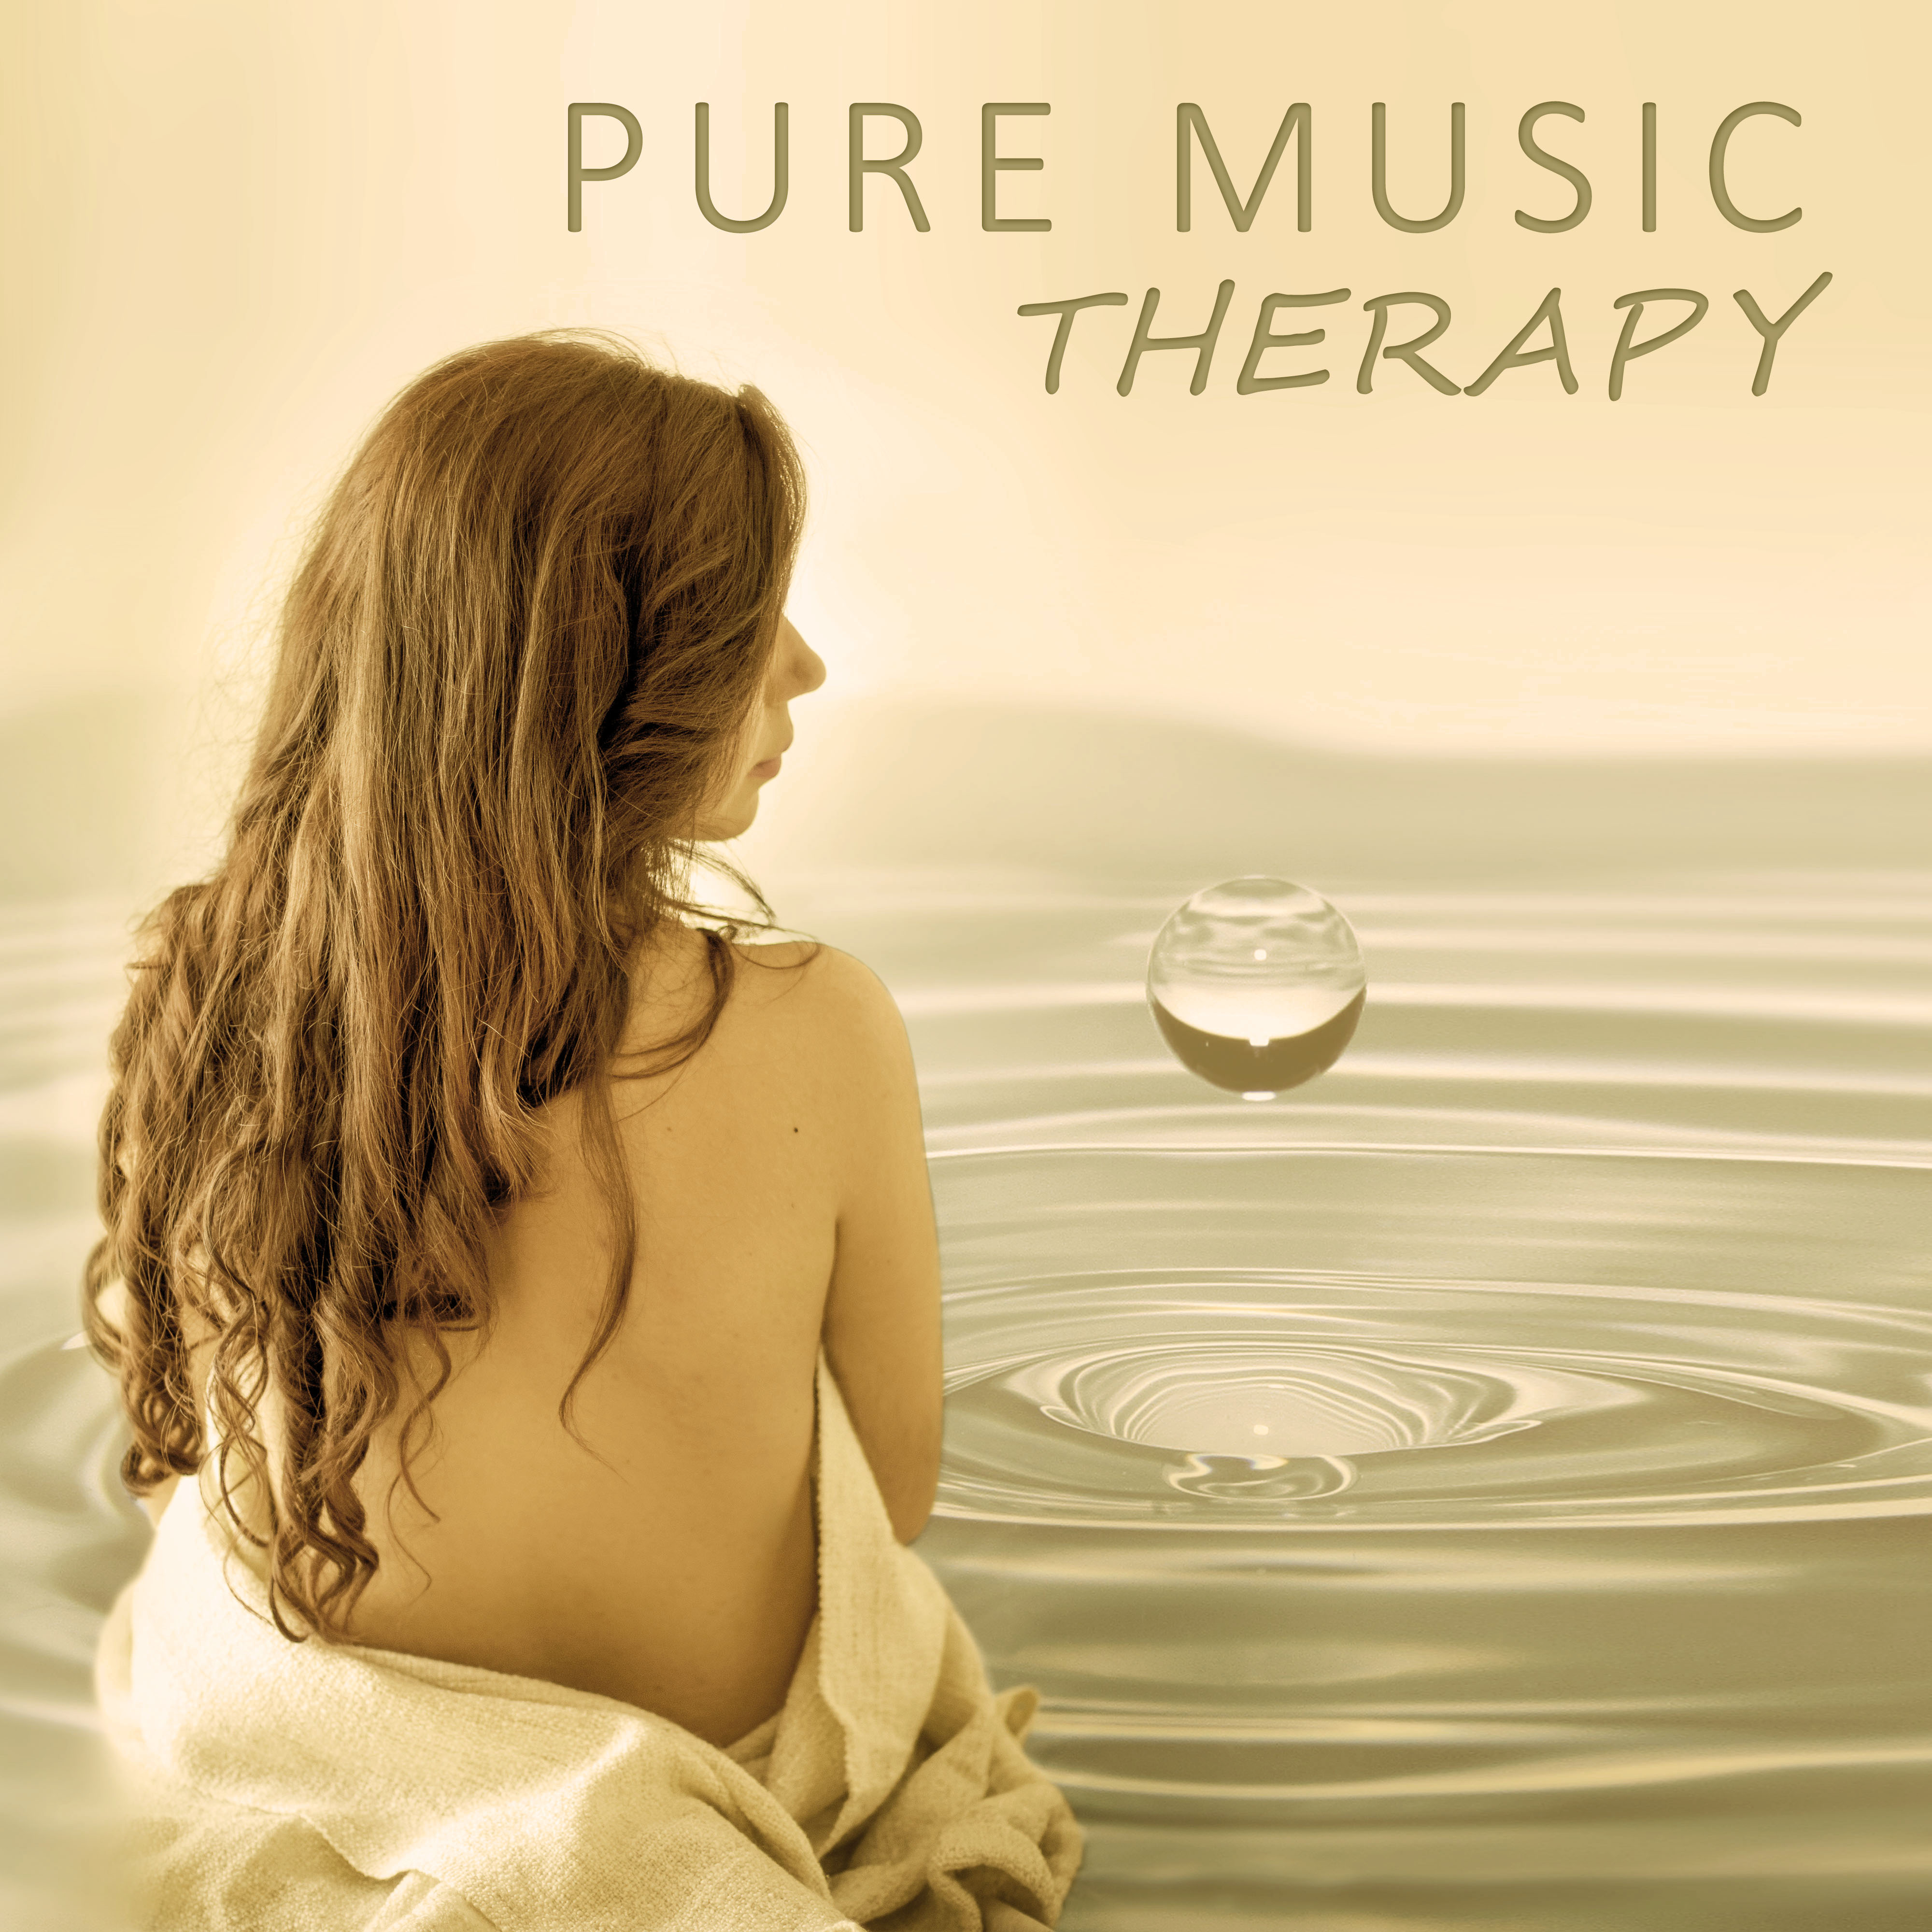 Pure Music Therapy  Healing Music, Mindfulness Meditations, Peaceful Music, Calmness, Tranquility, Stress Relief